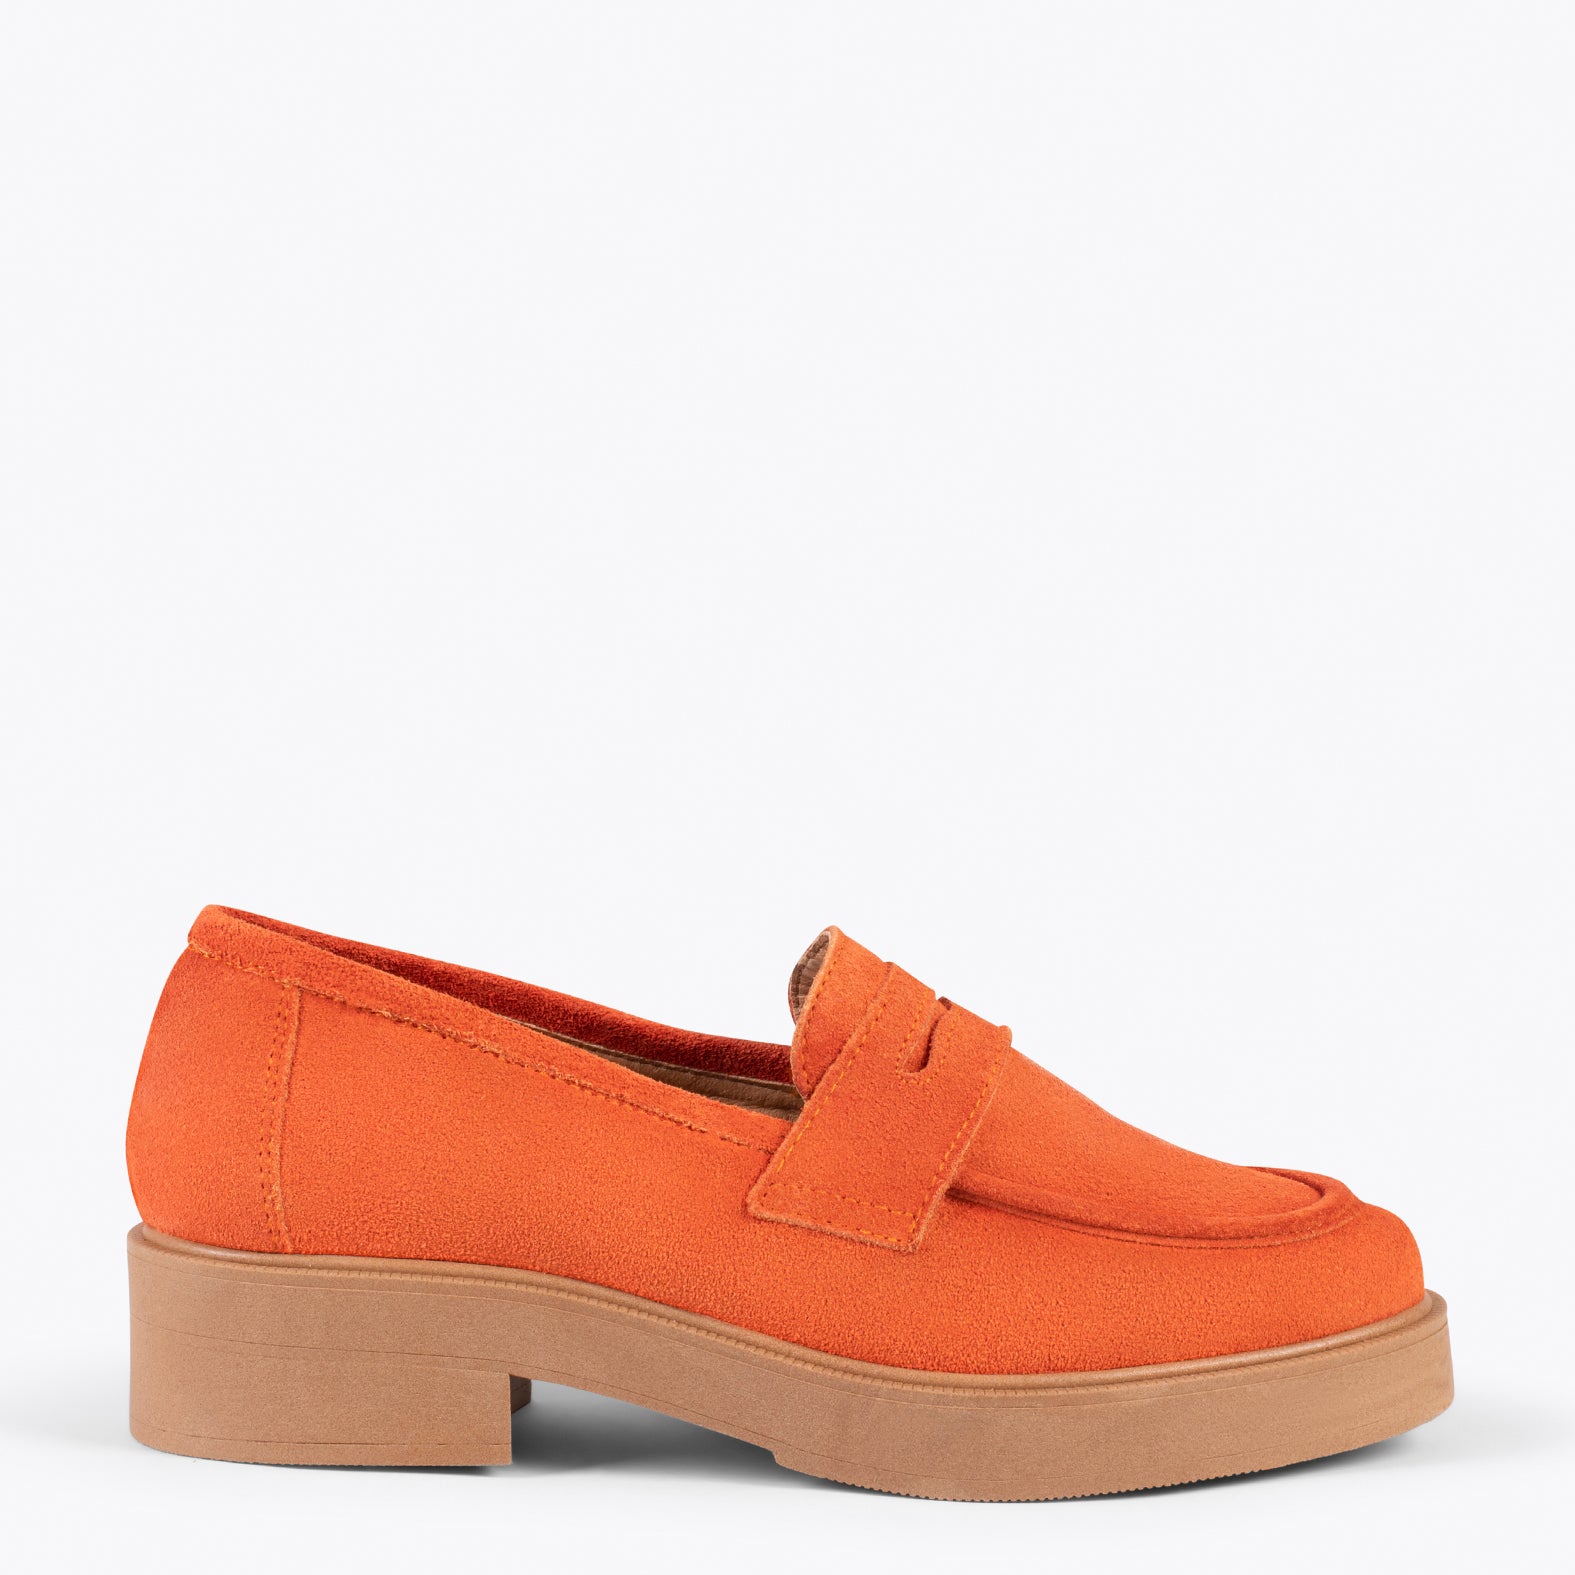 CASUAL – ORANGE classic moccasins with mask